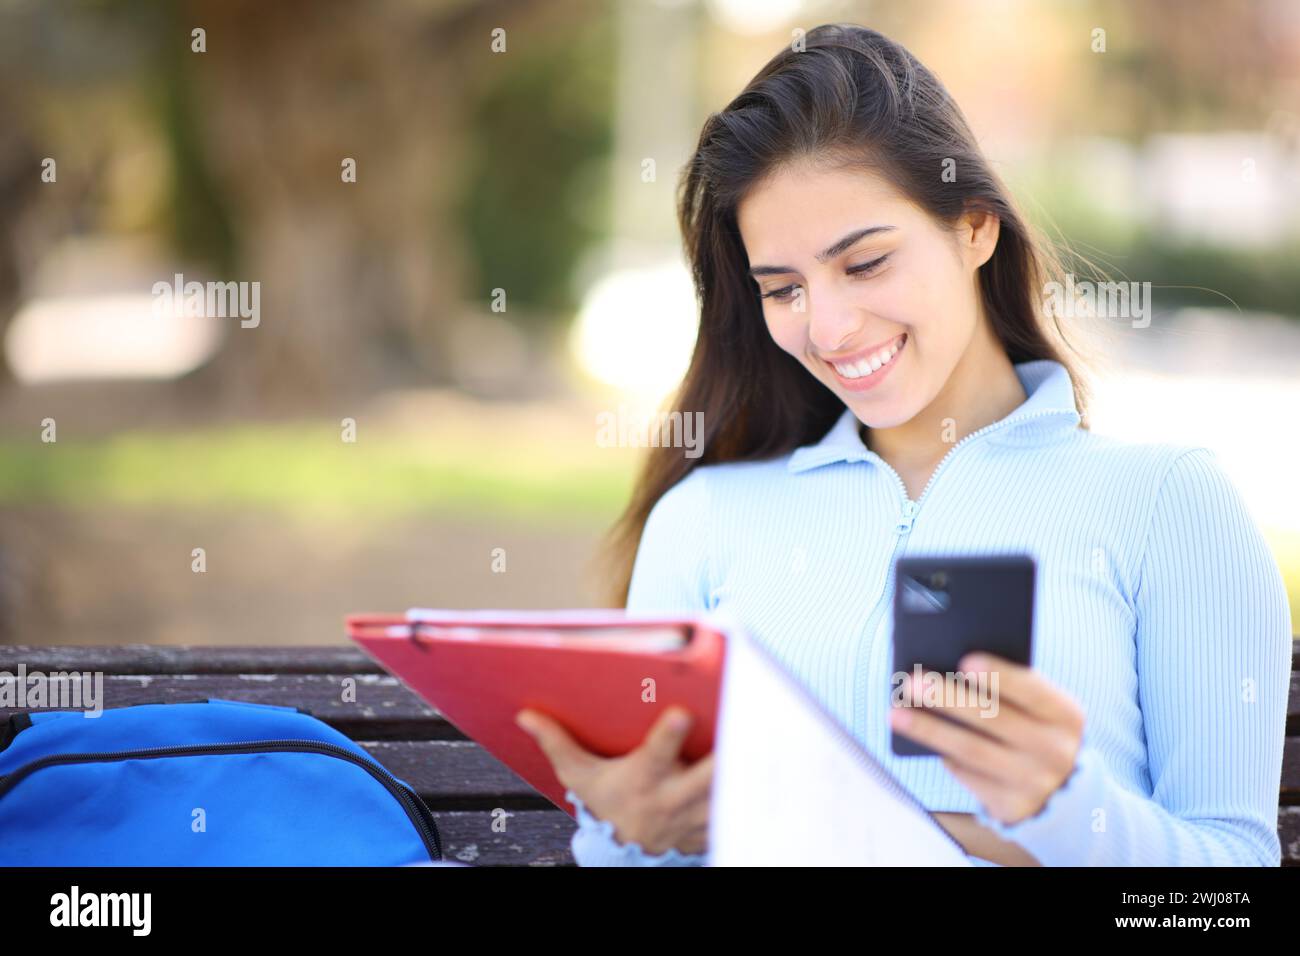 Happy student comparing phone and notes sitting in a park Stock Photo